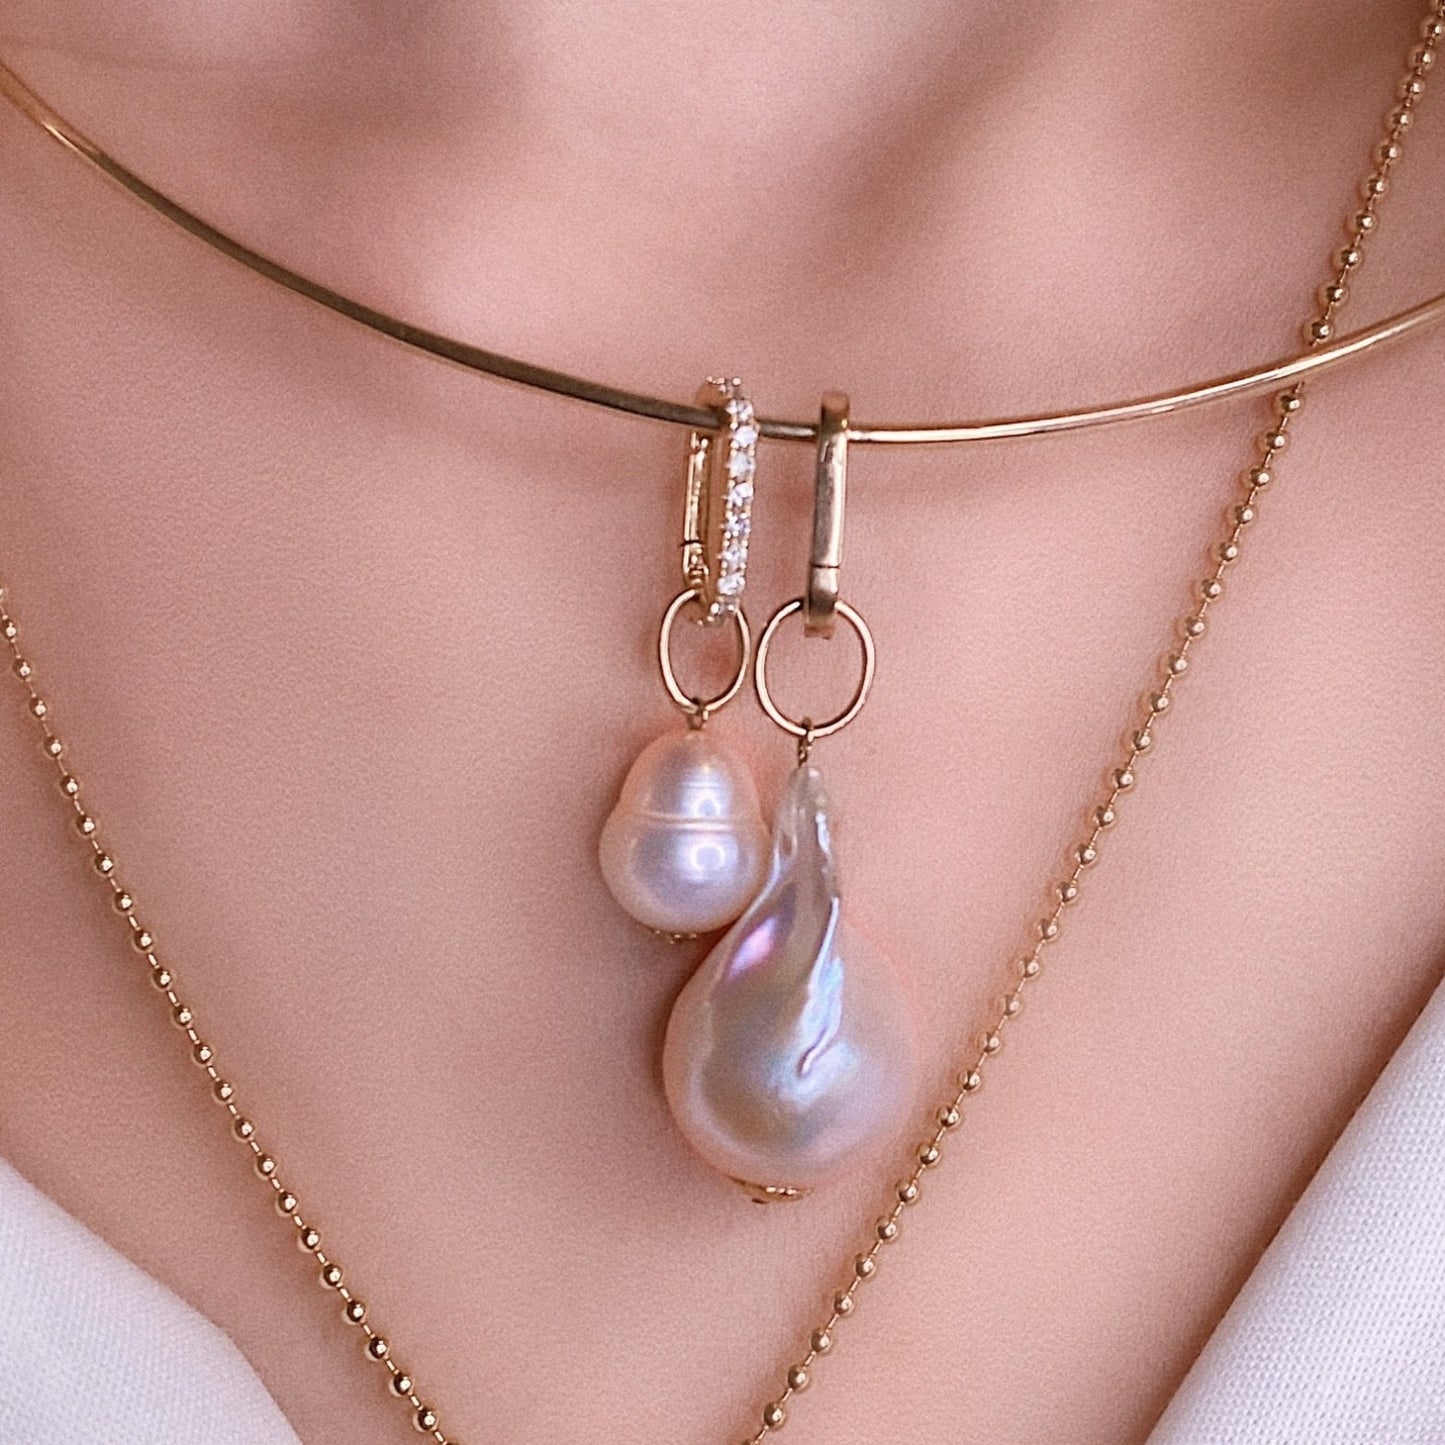 14k yellow gold small oval locking charm with diamonds. Styled on a neck locked onto a wire choker necklace and mini baroque pearl charm.